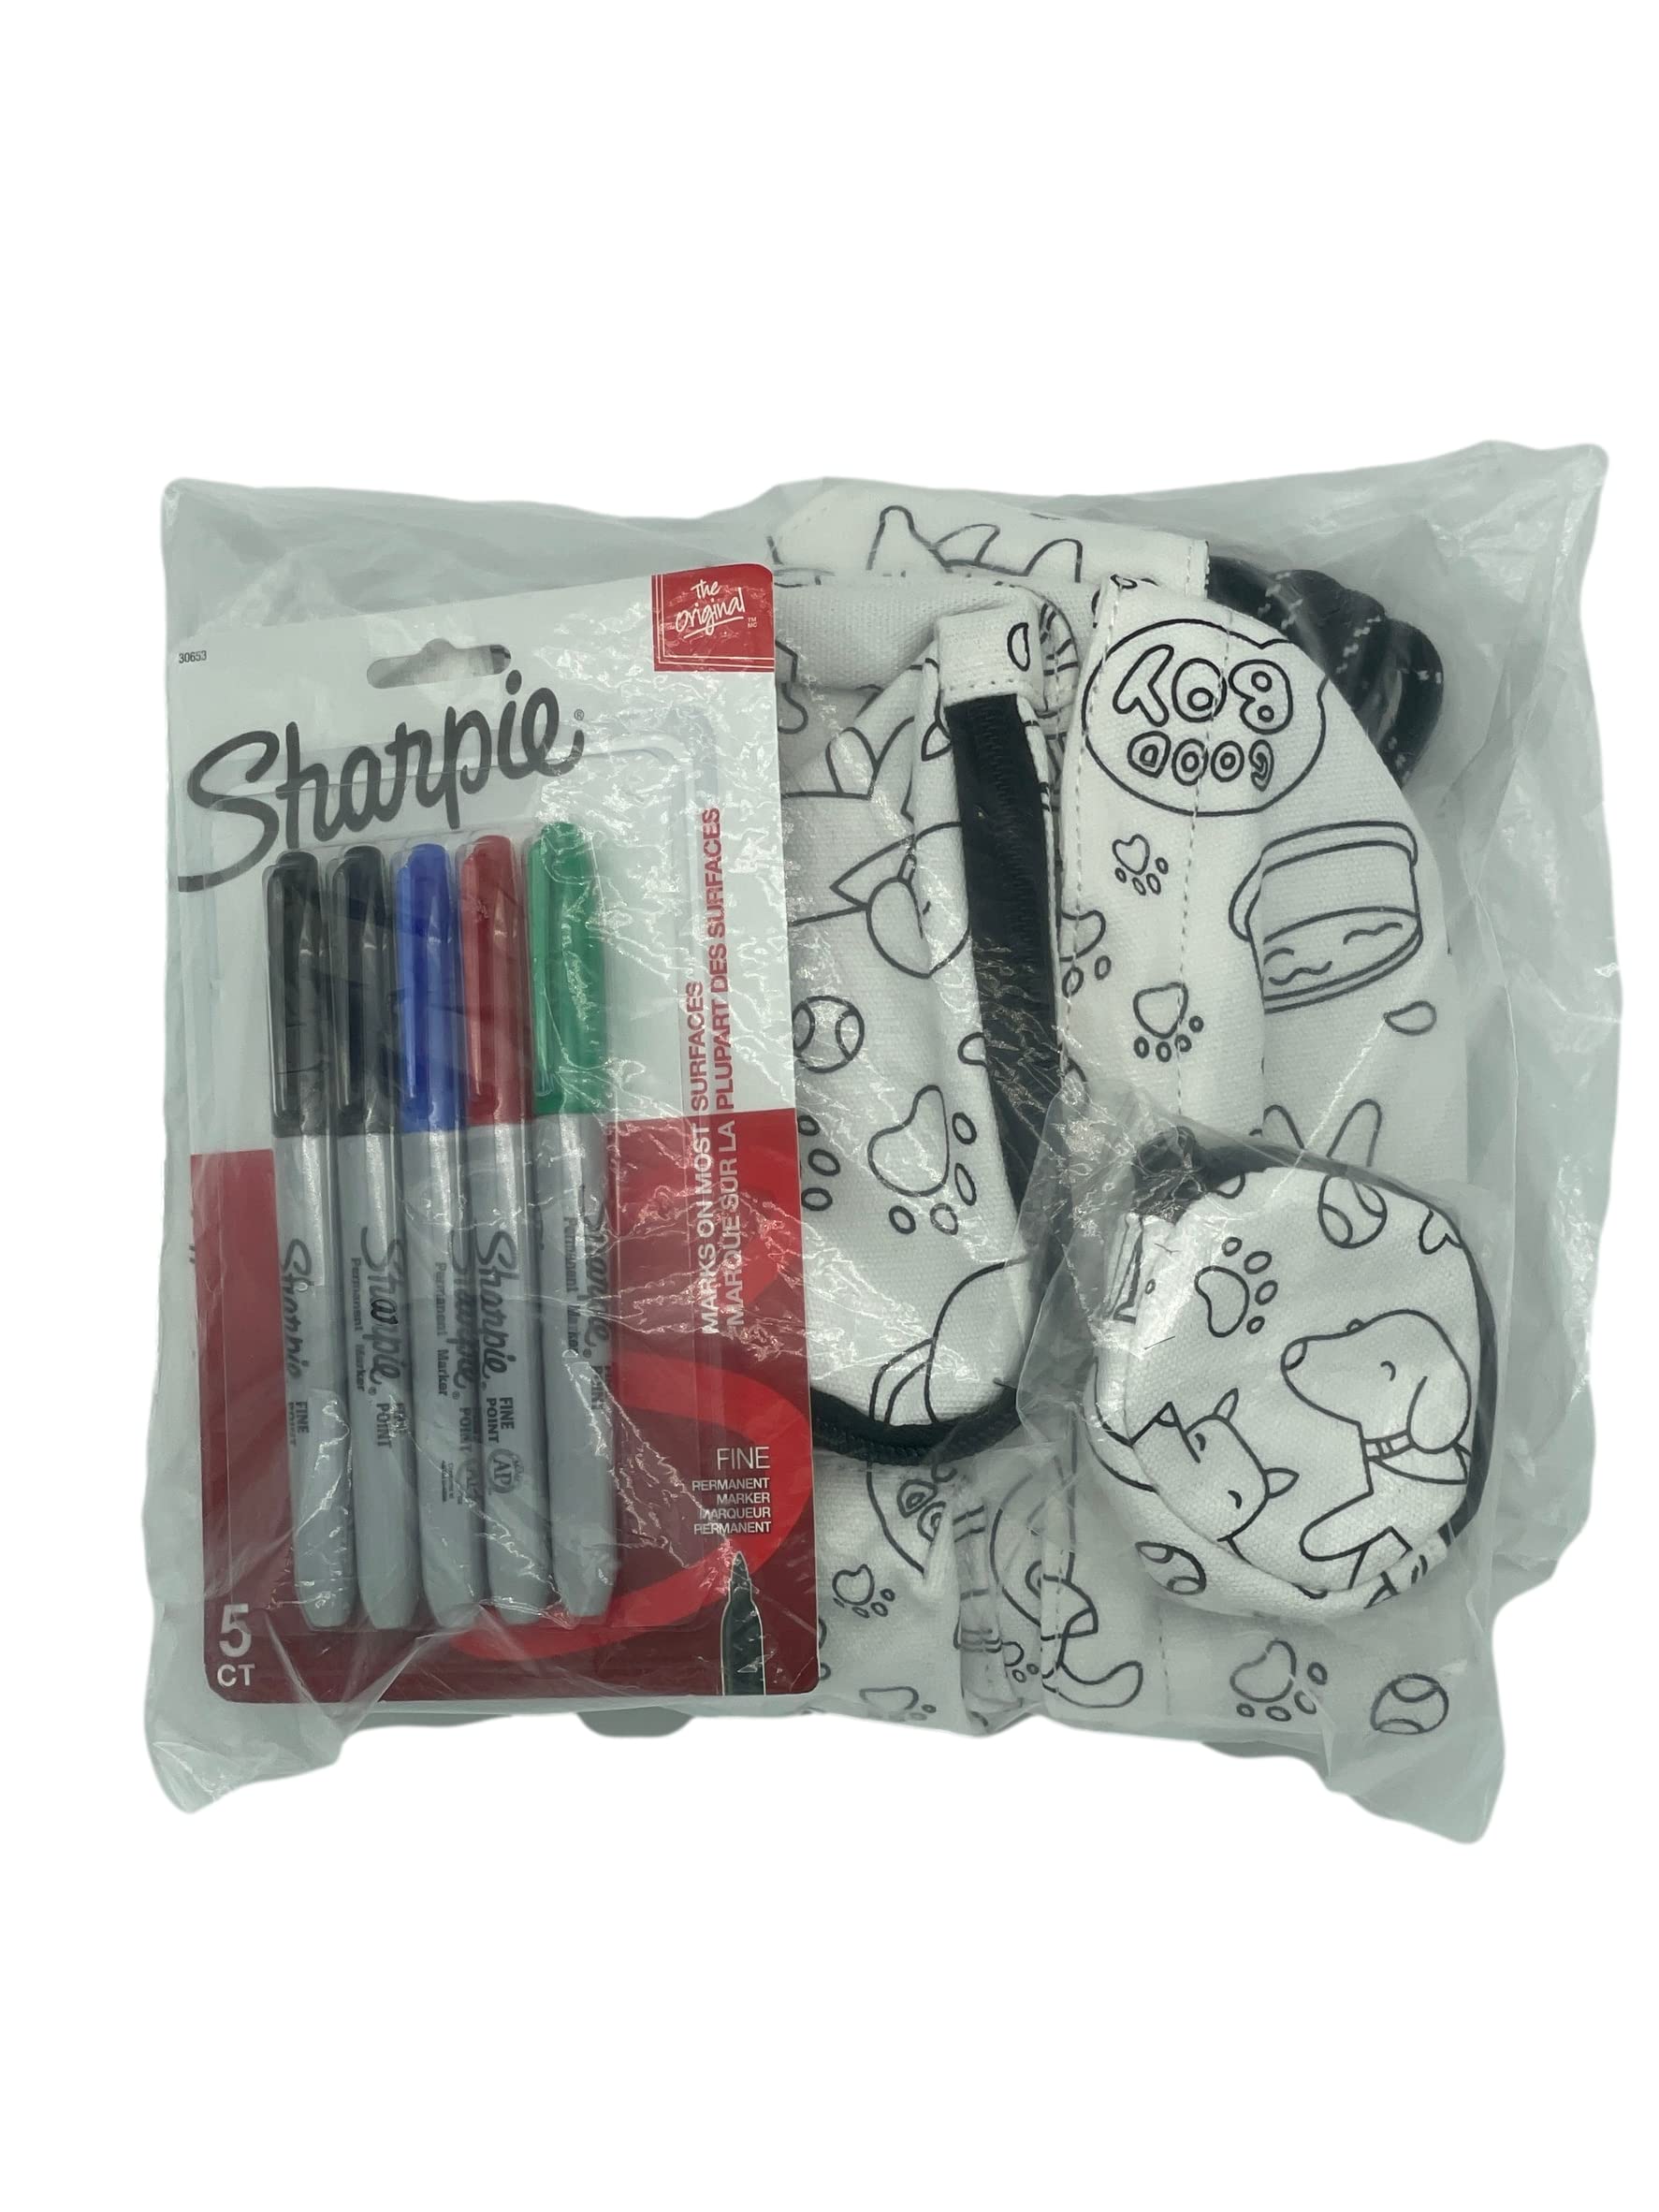 Color-It-Yourself Backpack, Personalize Creative Bag, Doodle Coin Purse, With Markers Set, Adorable Dogs or Whimsical Cats